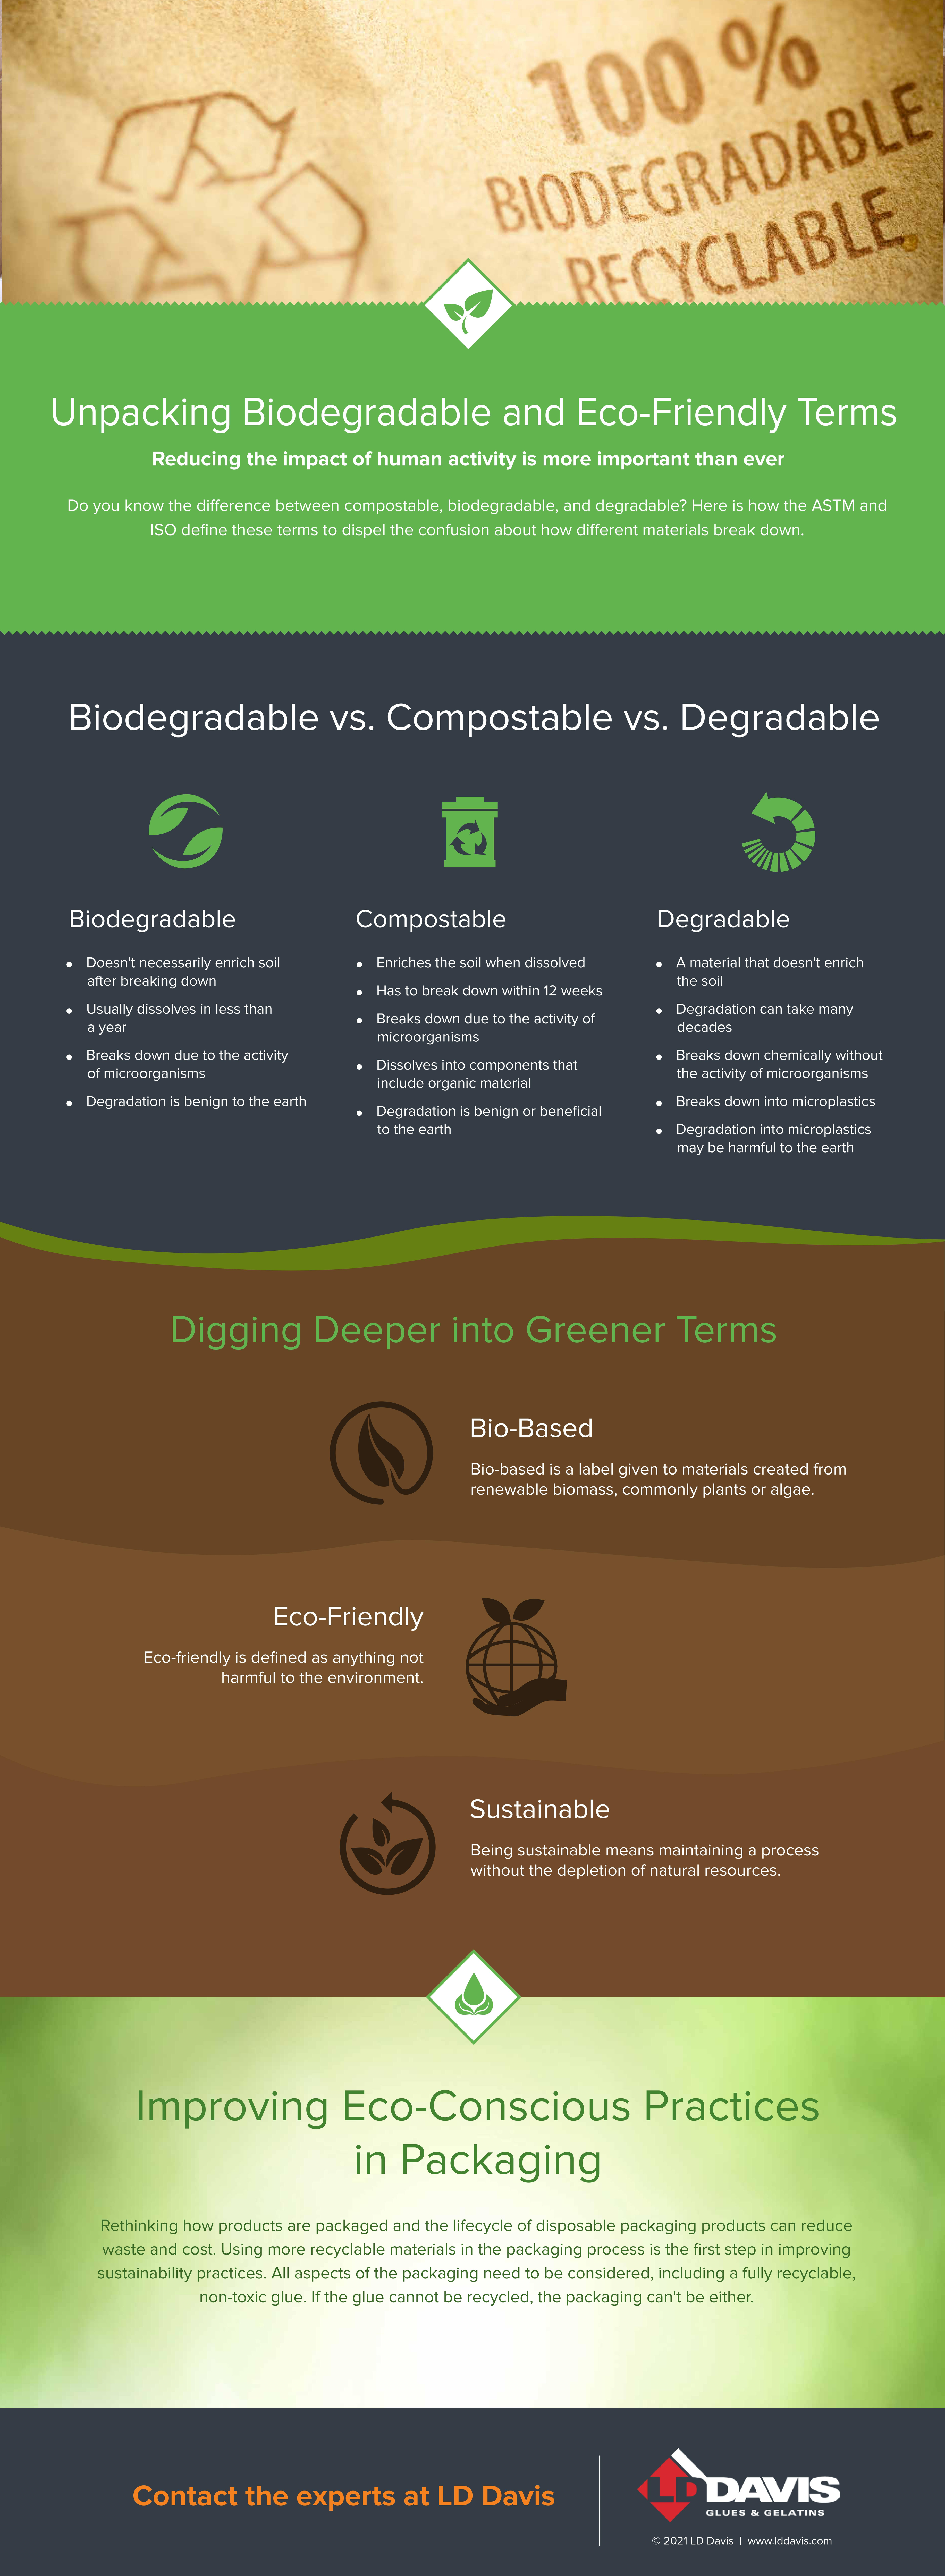 LD Davis biodegradable and eco-friendly terms infographic